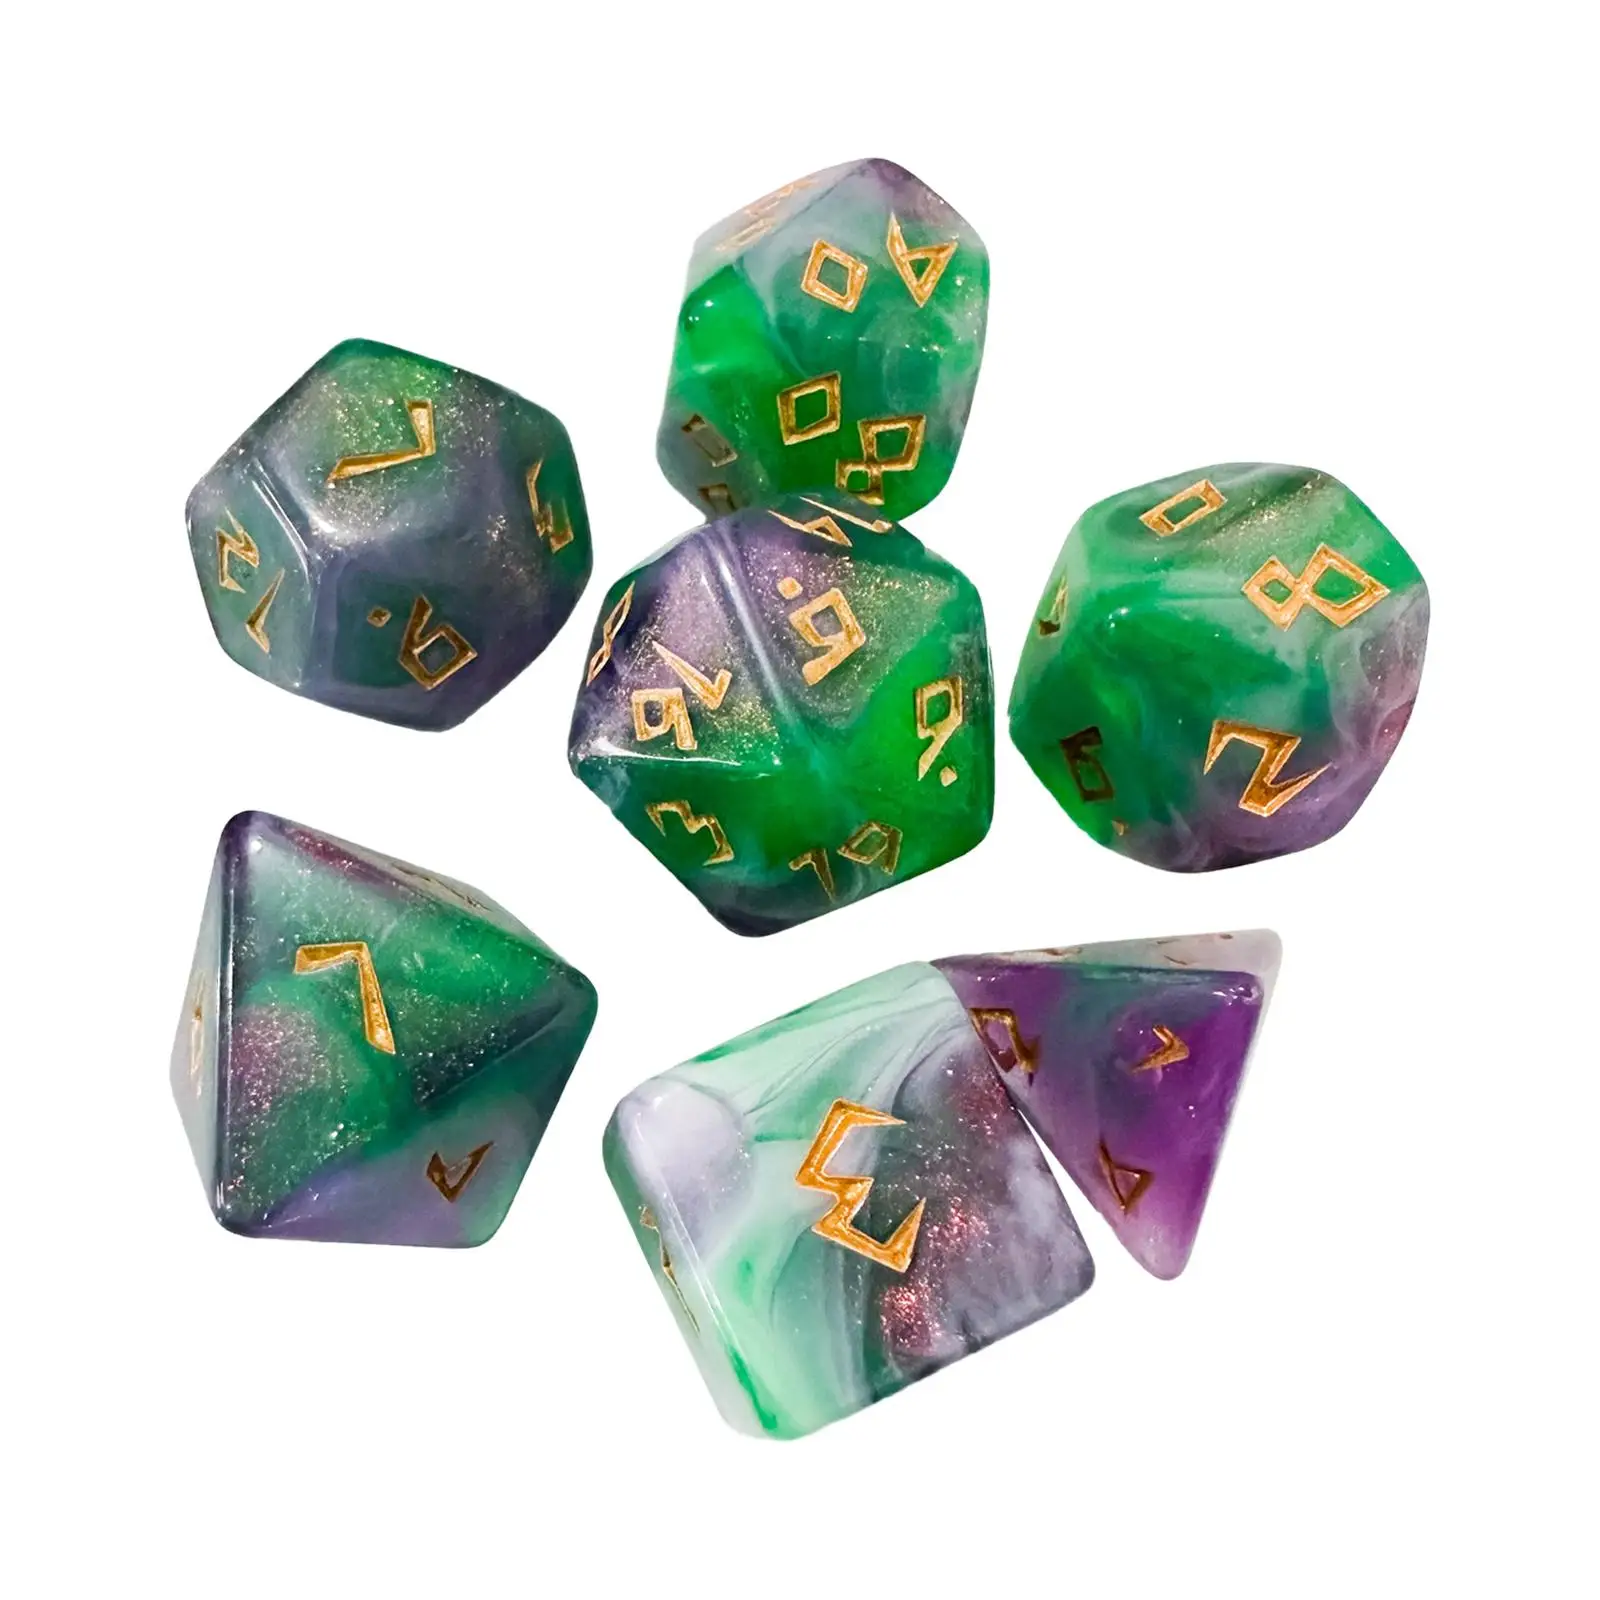 7Pcs Polyhedral Dice Handmade Multisided Dice for Role Playing Tabletop Games Party Favors Entertainment Toy Family Gatherings